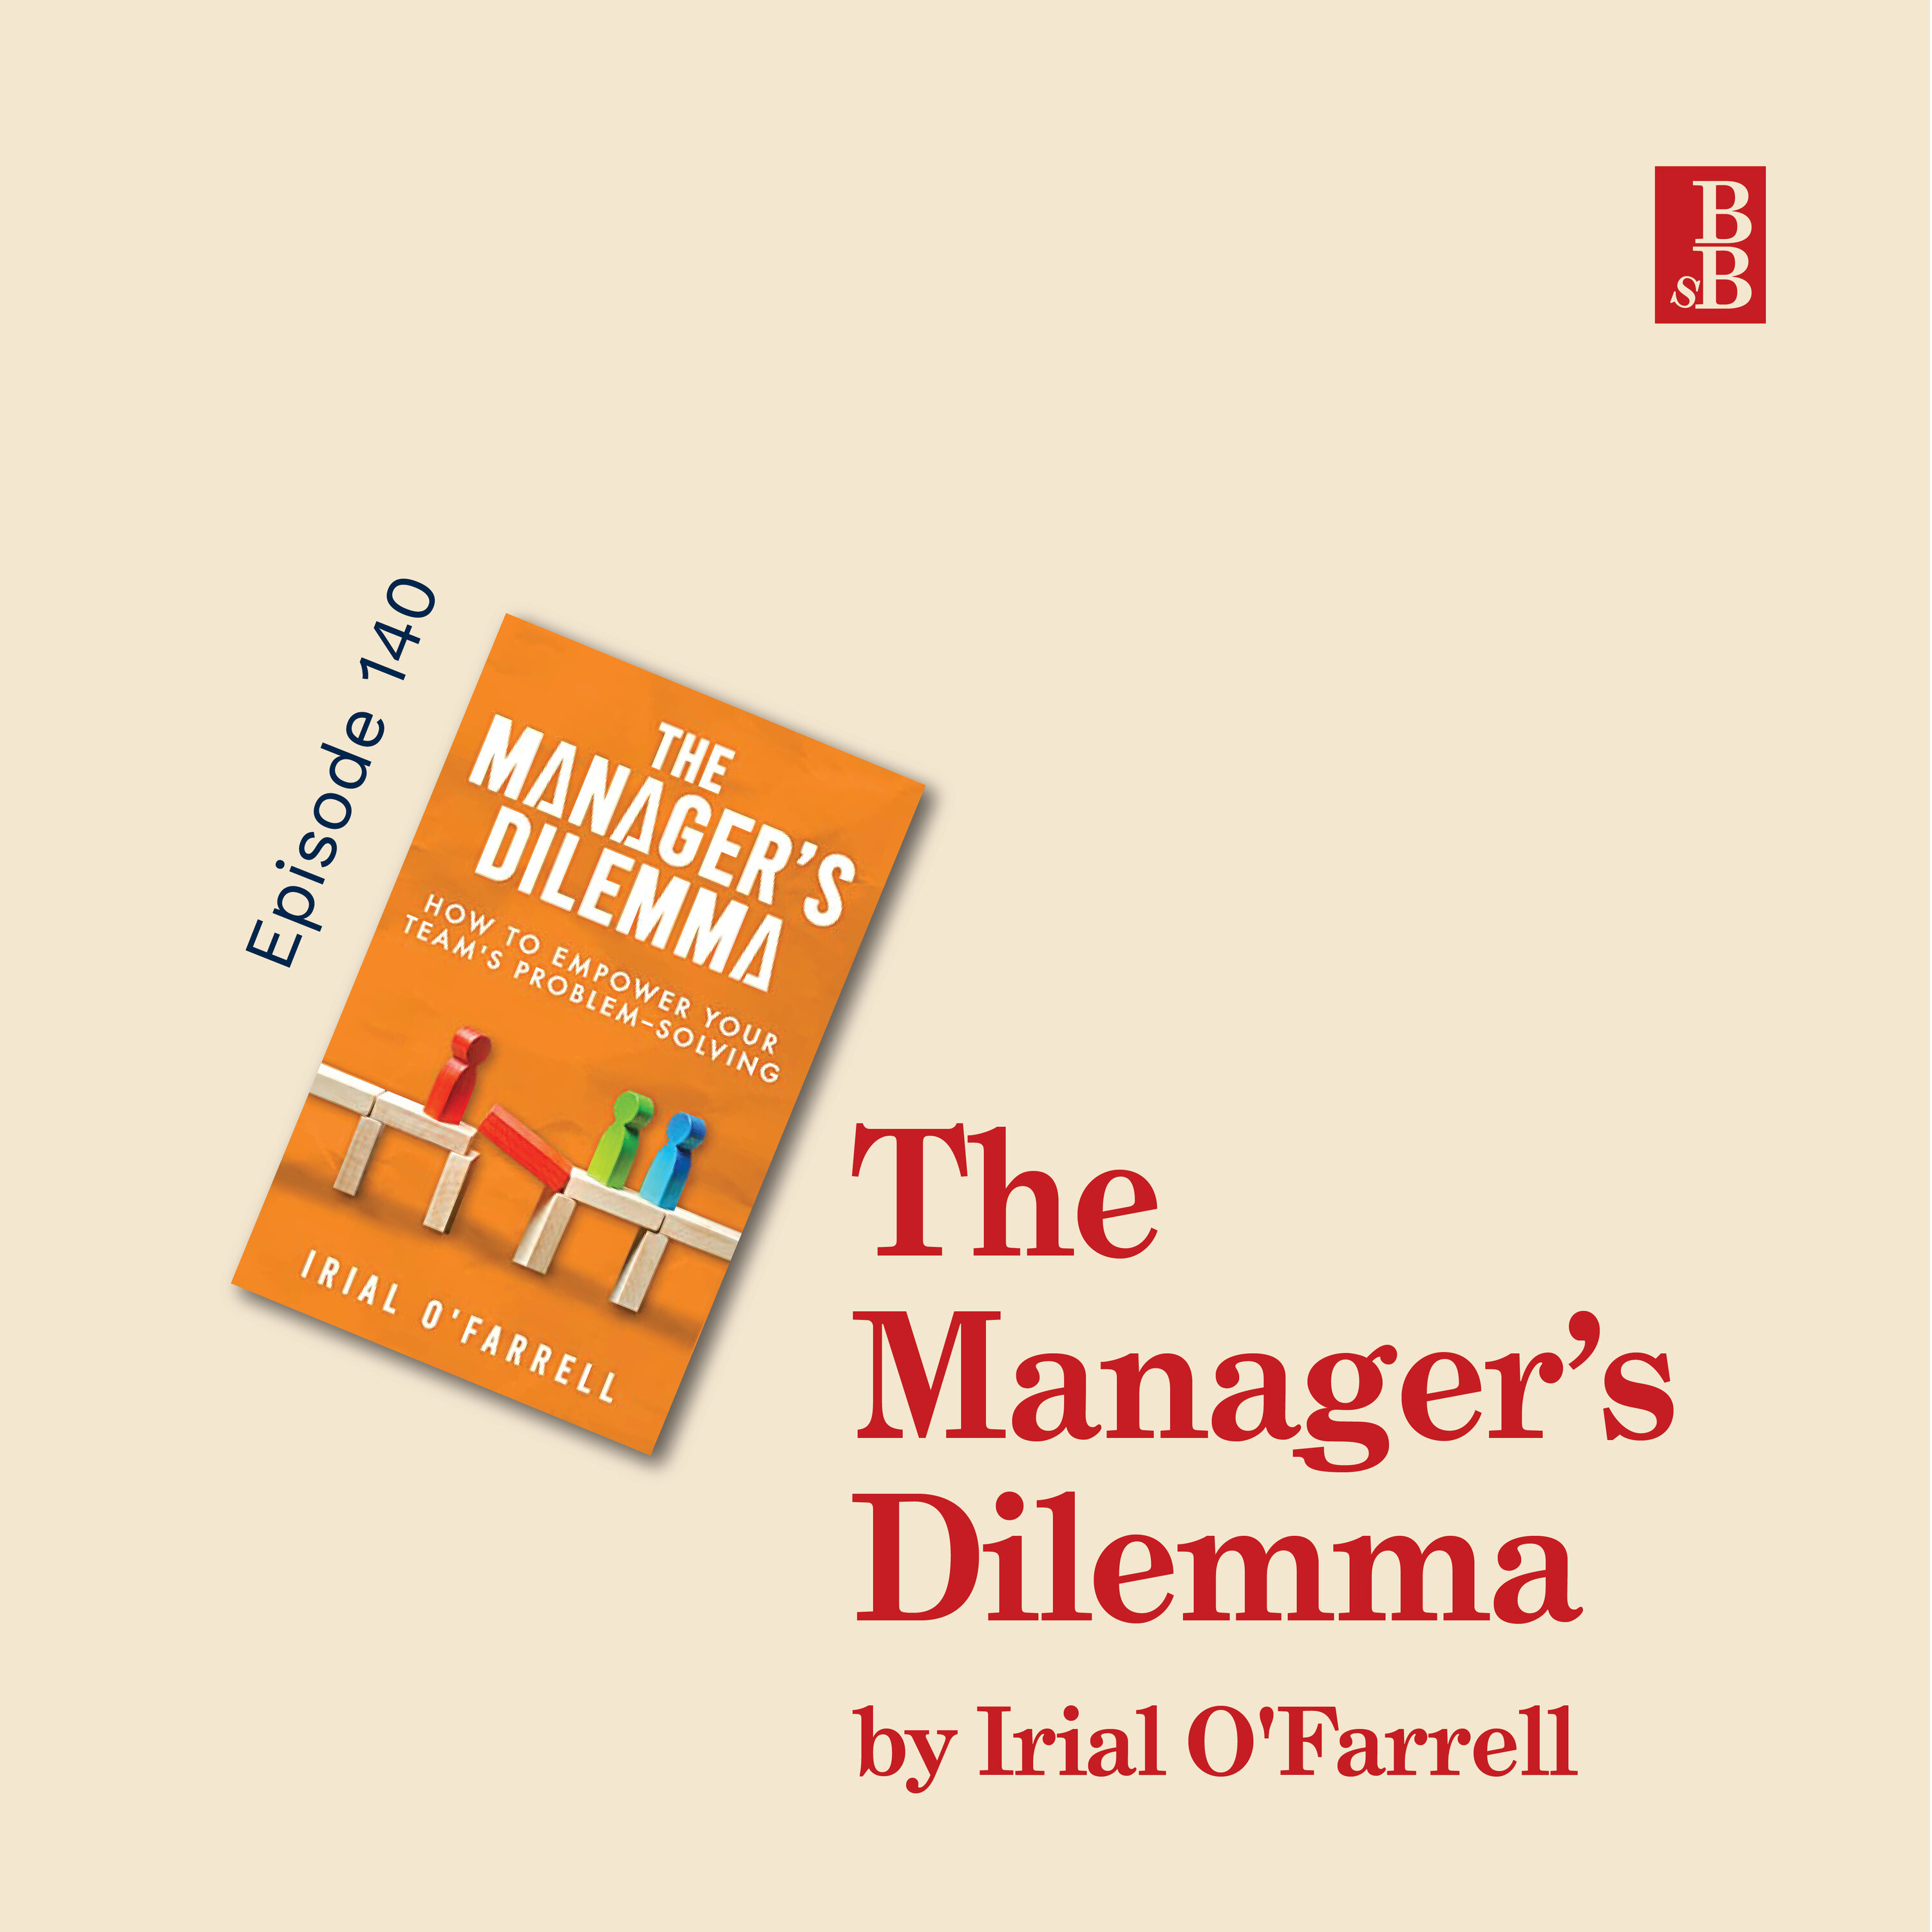 The Manager's Dilemma by Irial O'Farrell: how to solve your problem solving problem